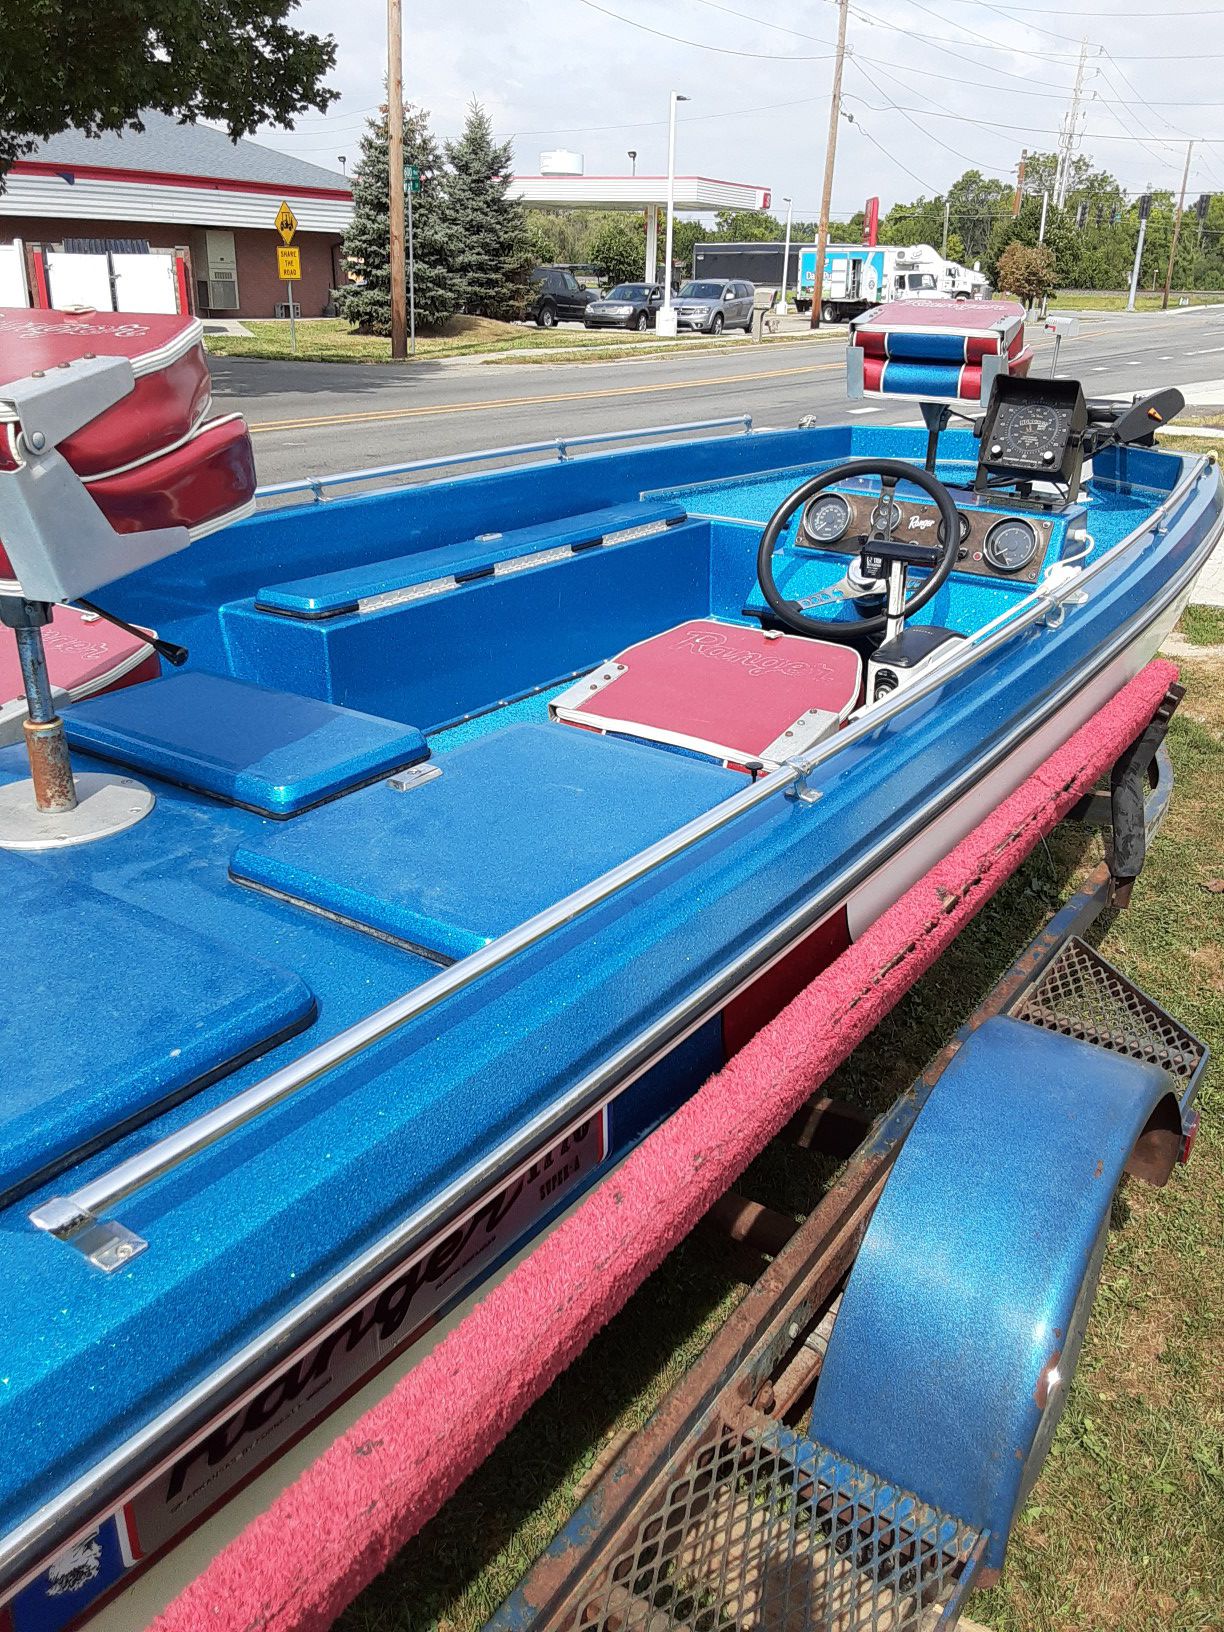 1976 Ranger bass boat garage kept not use very much must sell for health reasons $2,000 {contact info removed} must see it